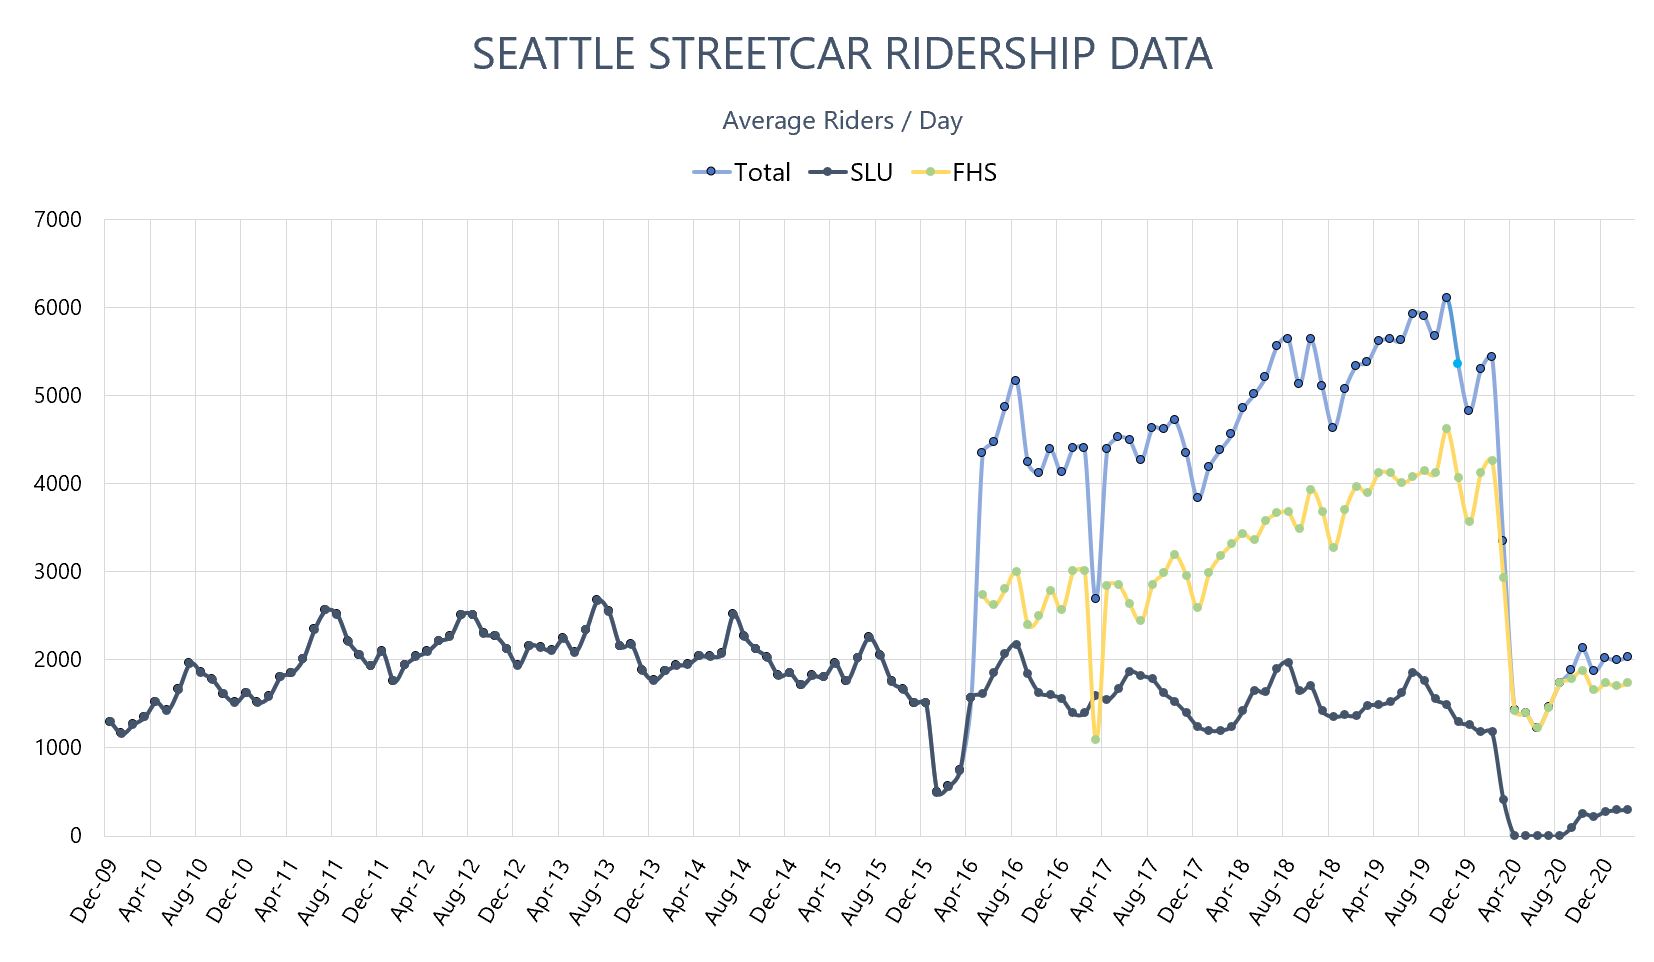 Graph of Streetcar ridership data (average daily from January 2011 to May 2019). South Lake Union hovers near 2K per day.  First Hill increases from near 3K to 4K per day. Total average ridership in May 2019 was over 5.5K per day.